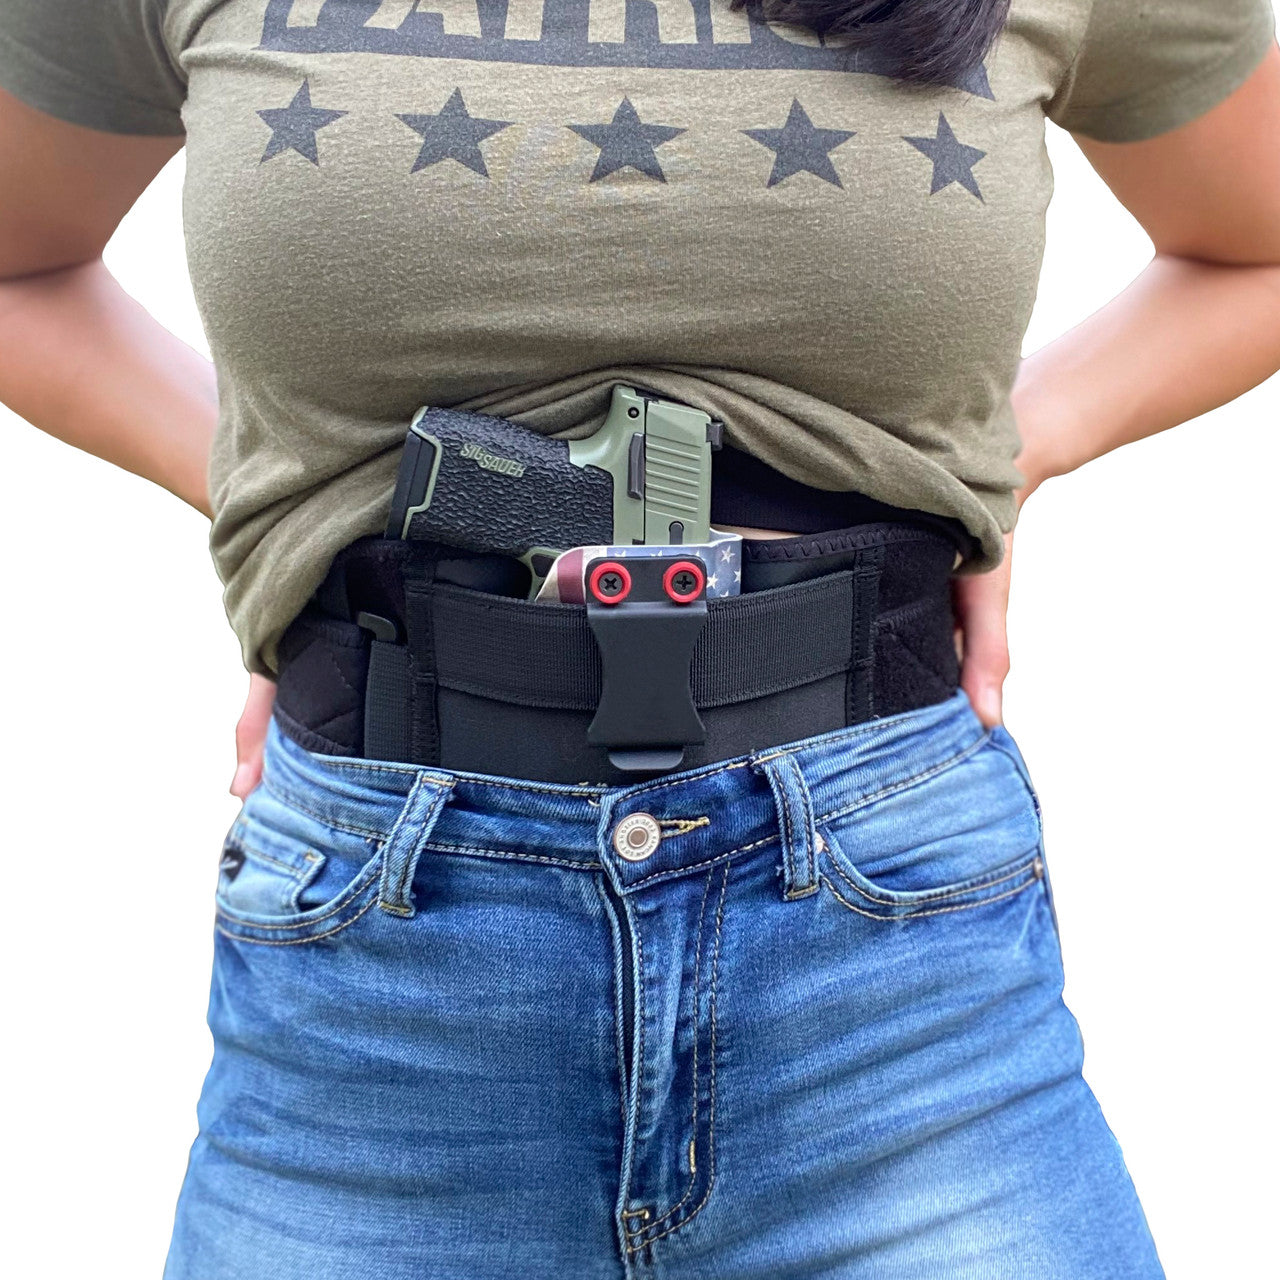 Strapt Tac Belly Band Holster | Shop Now | Free Shipping in US